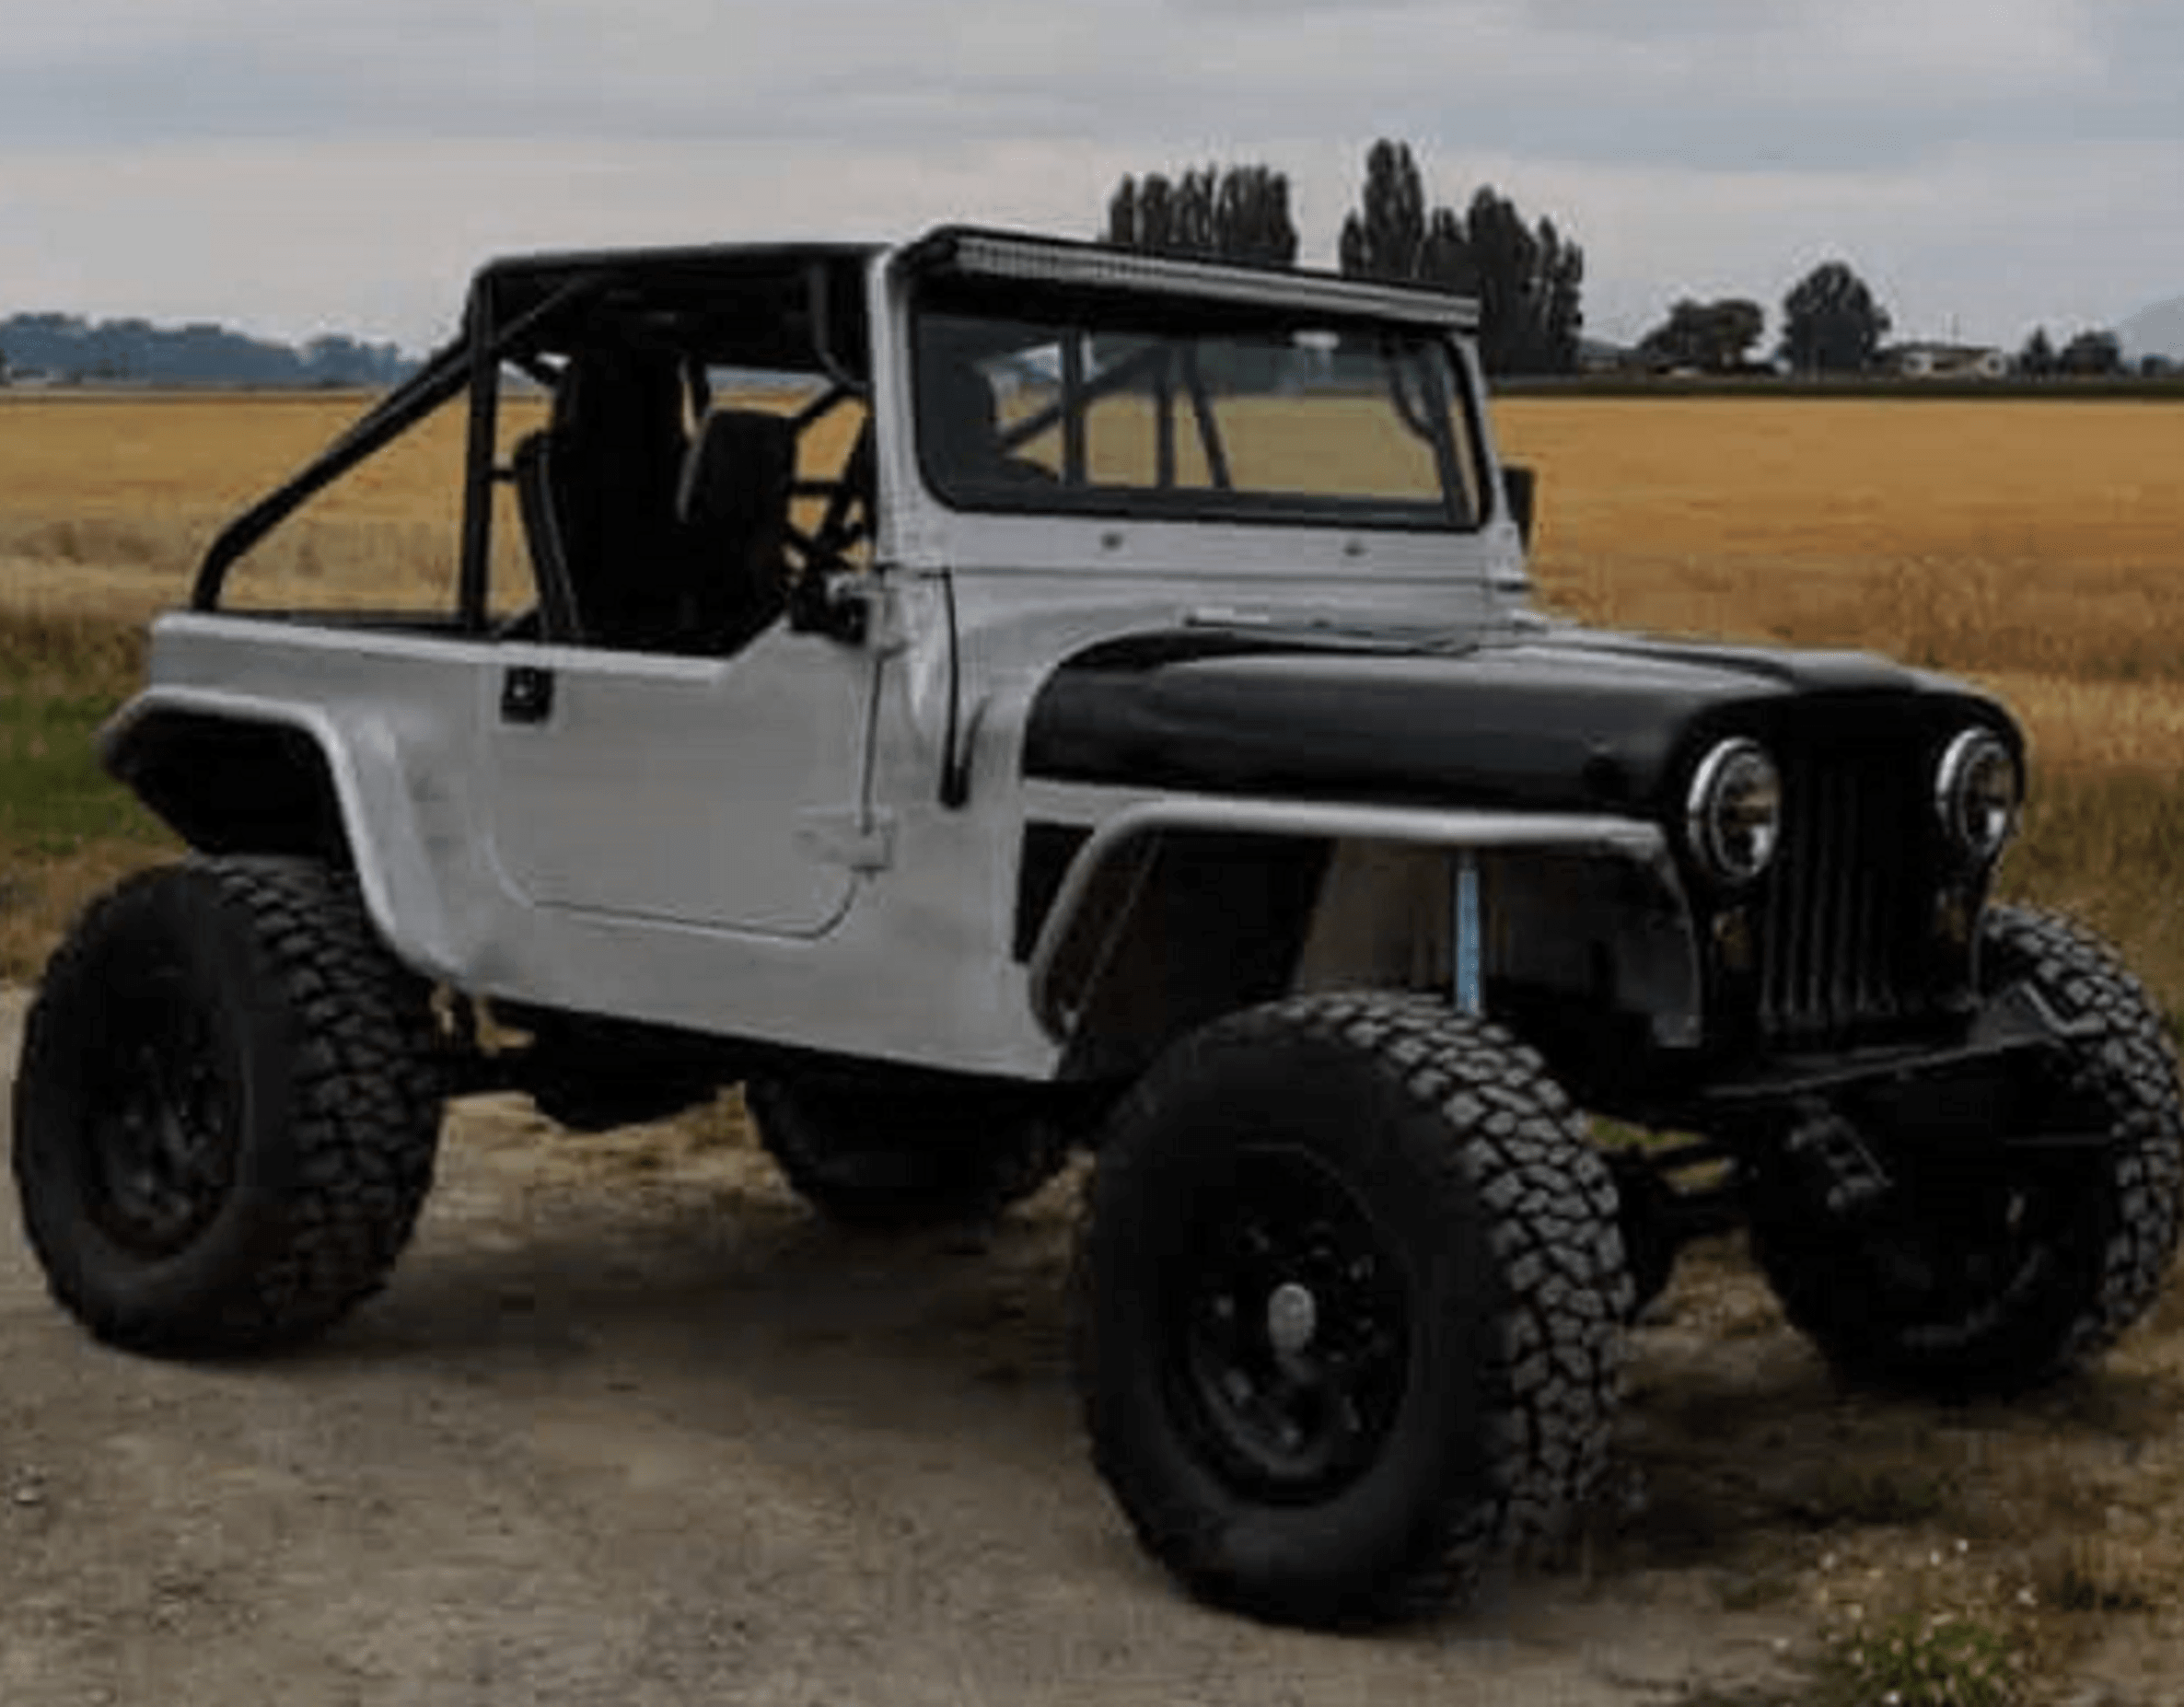 Project Thumbnail for Fully Aluminum Jeep CJ5 with LS Motor - many machined parts, fully custom